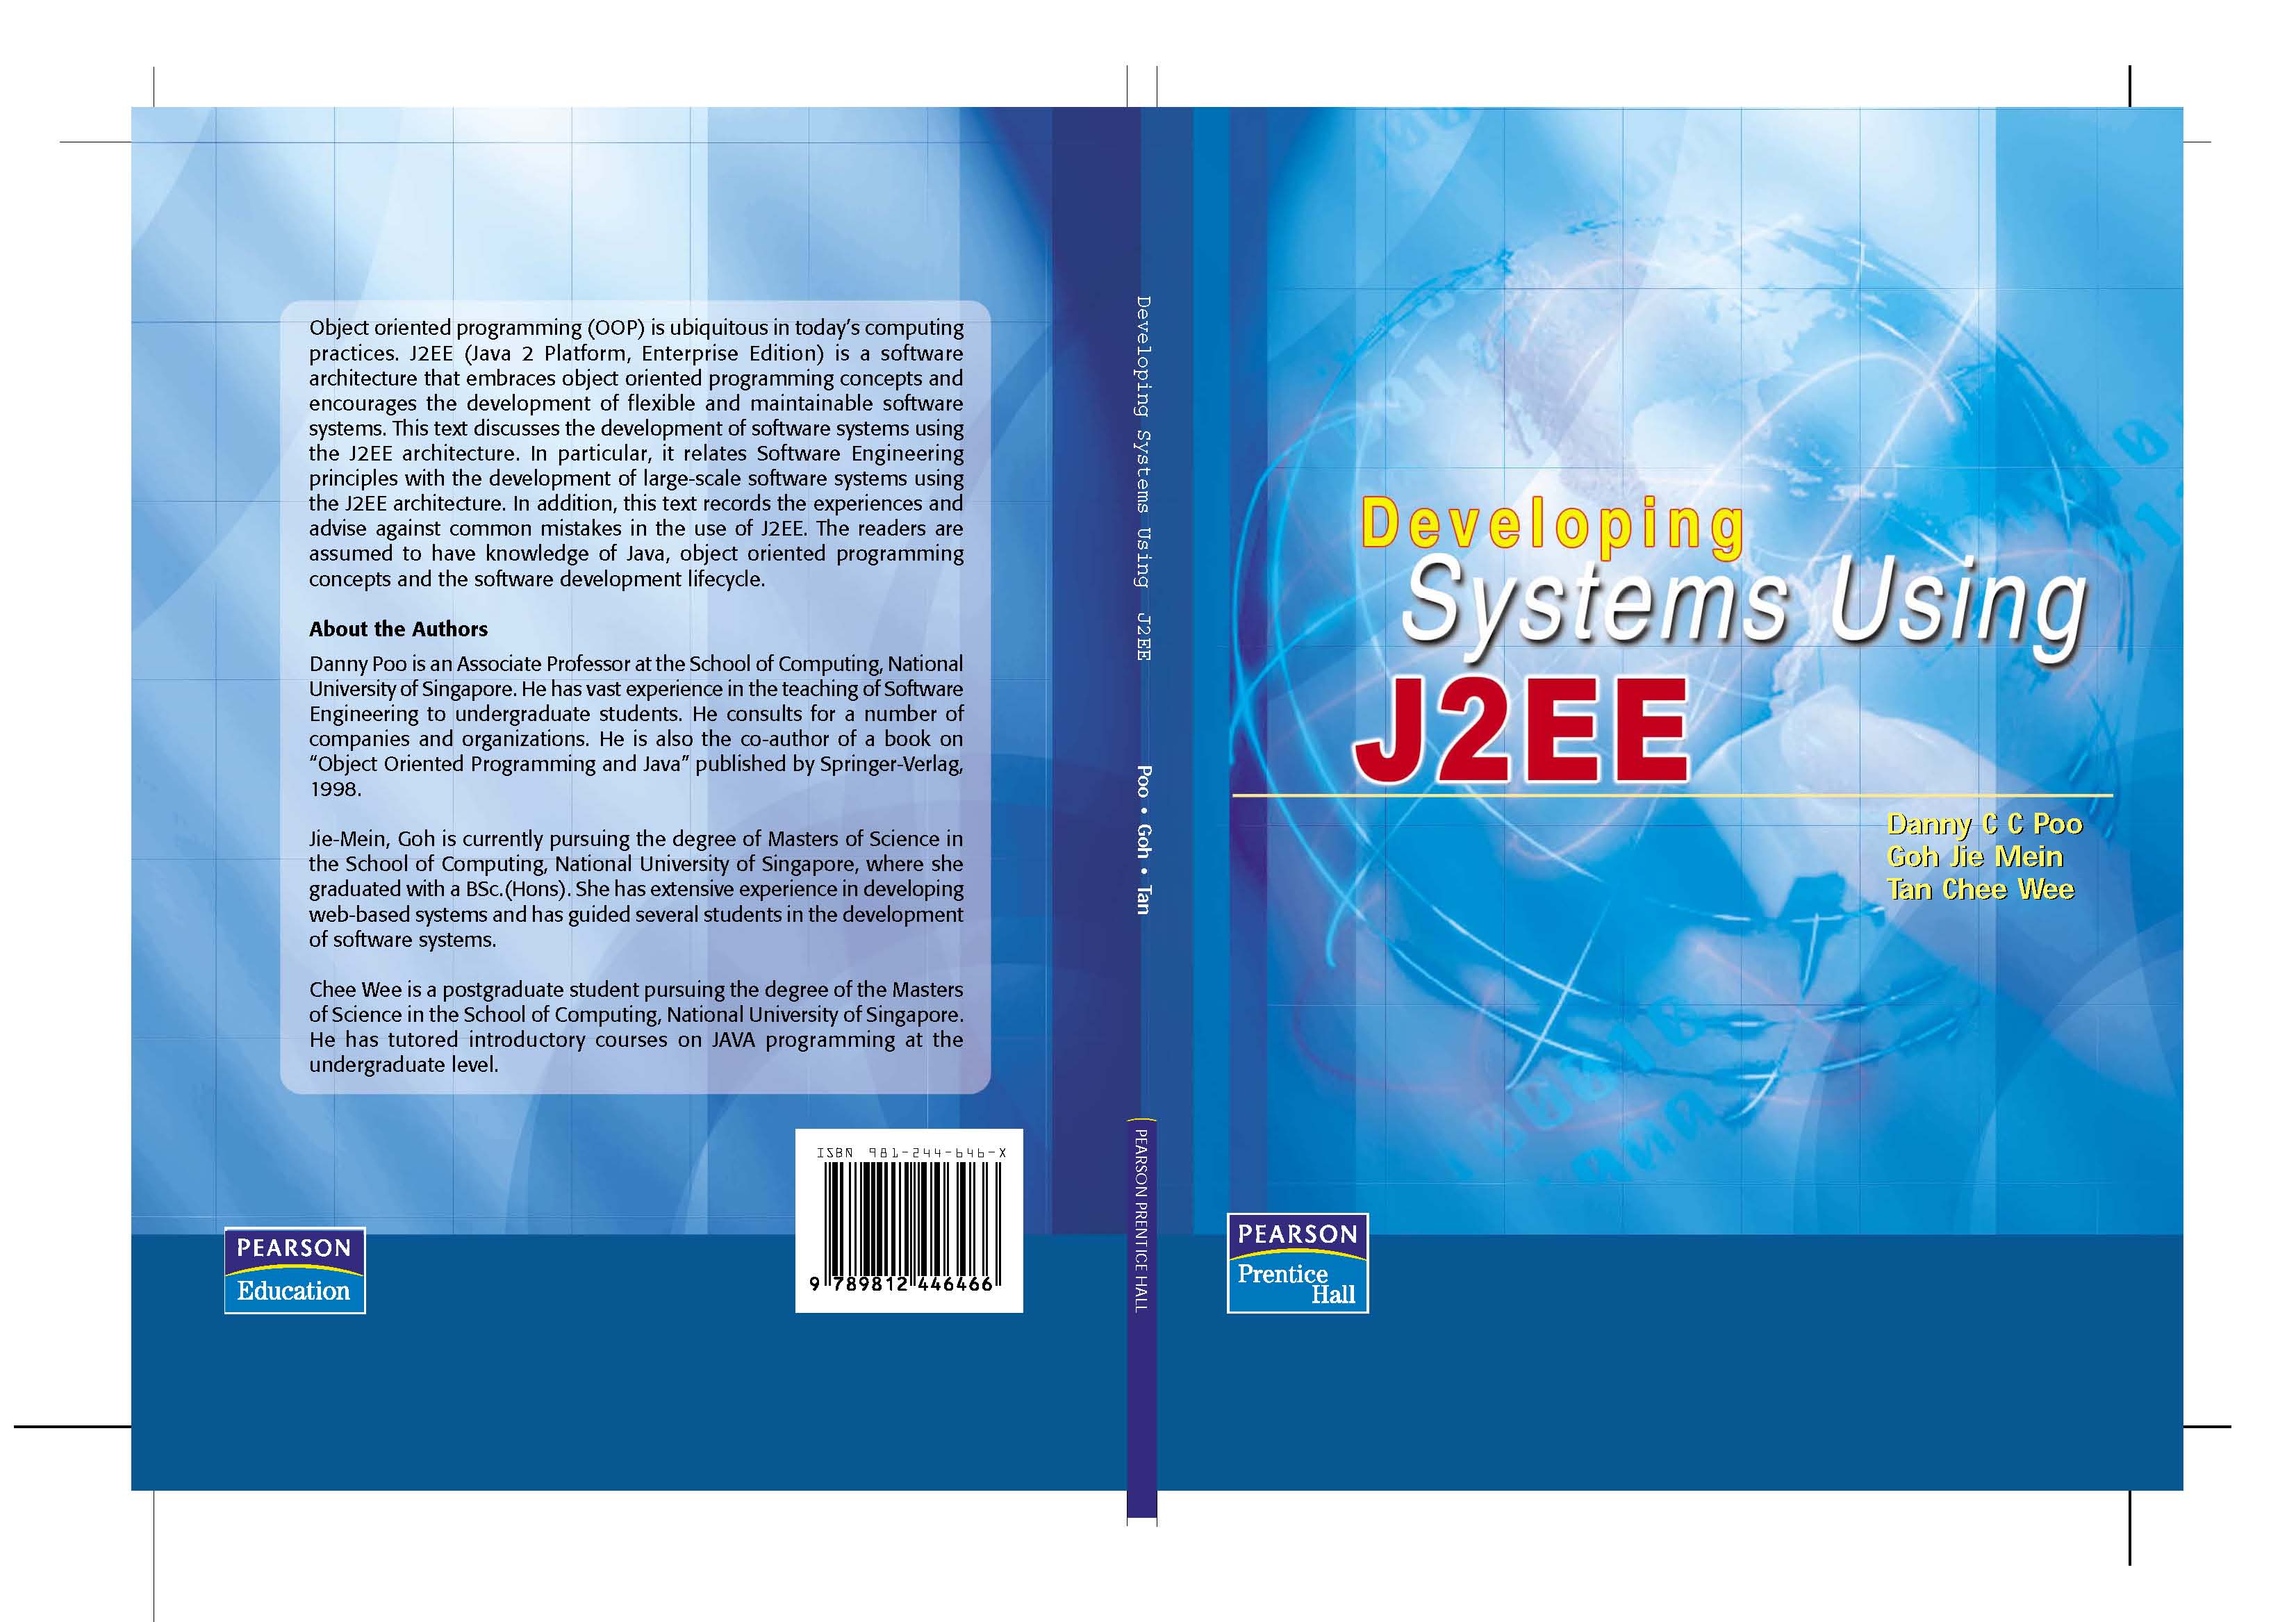 Developing Systems Using J2EE